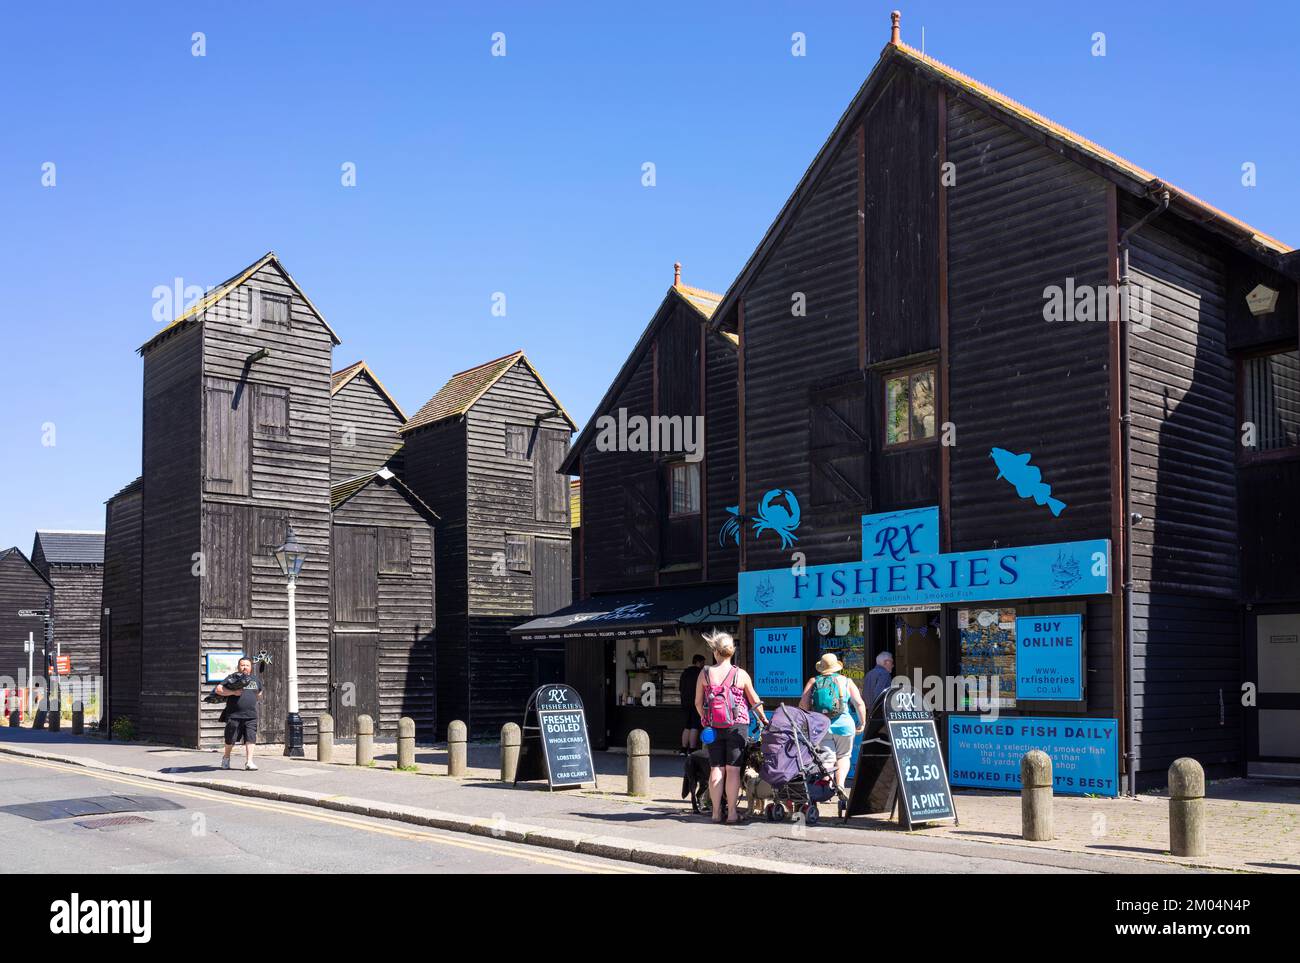 Hastings Old Town Fisheries on The Stade with traditional black painted tall net huts Hasting's Net Shops Hastings East Sussex England UK GB Europe Stock Photo